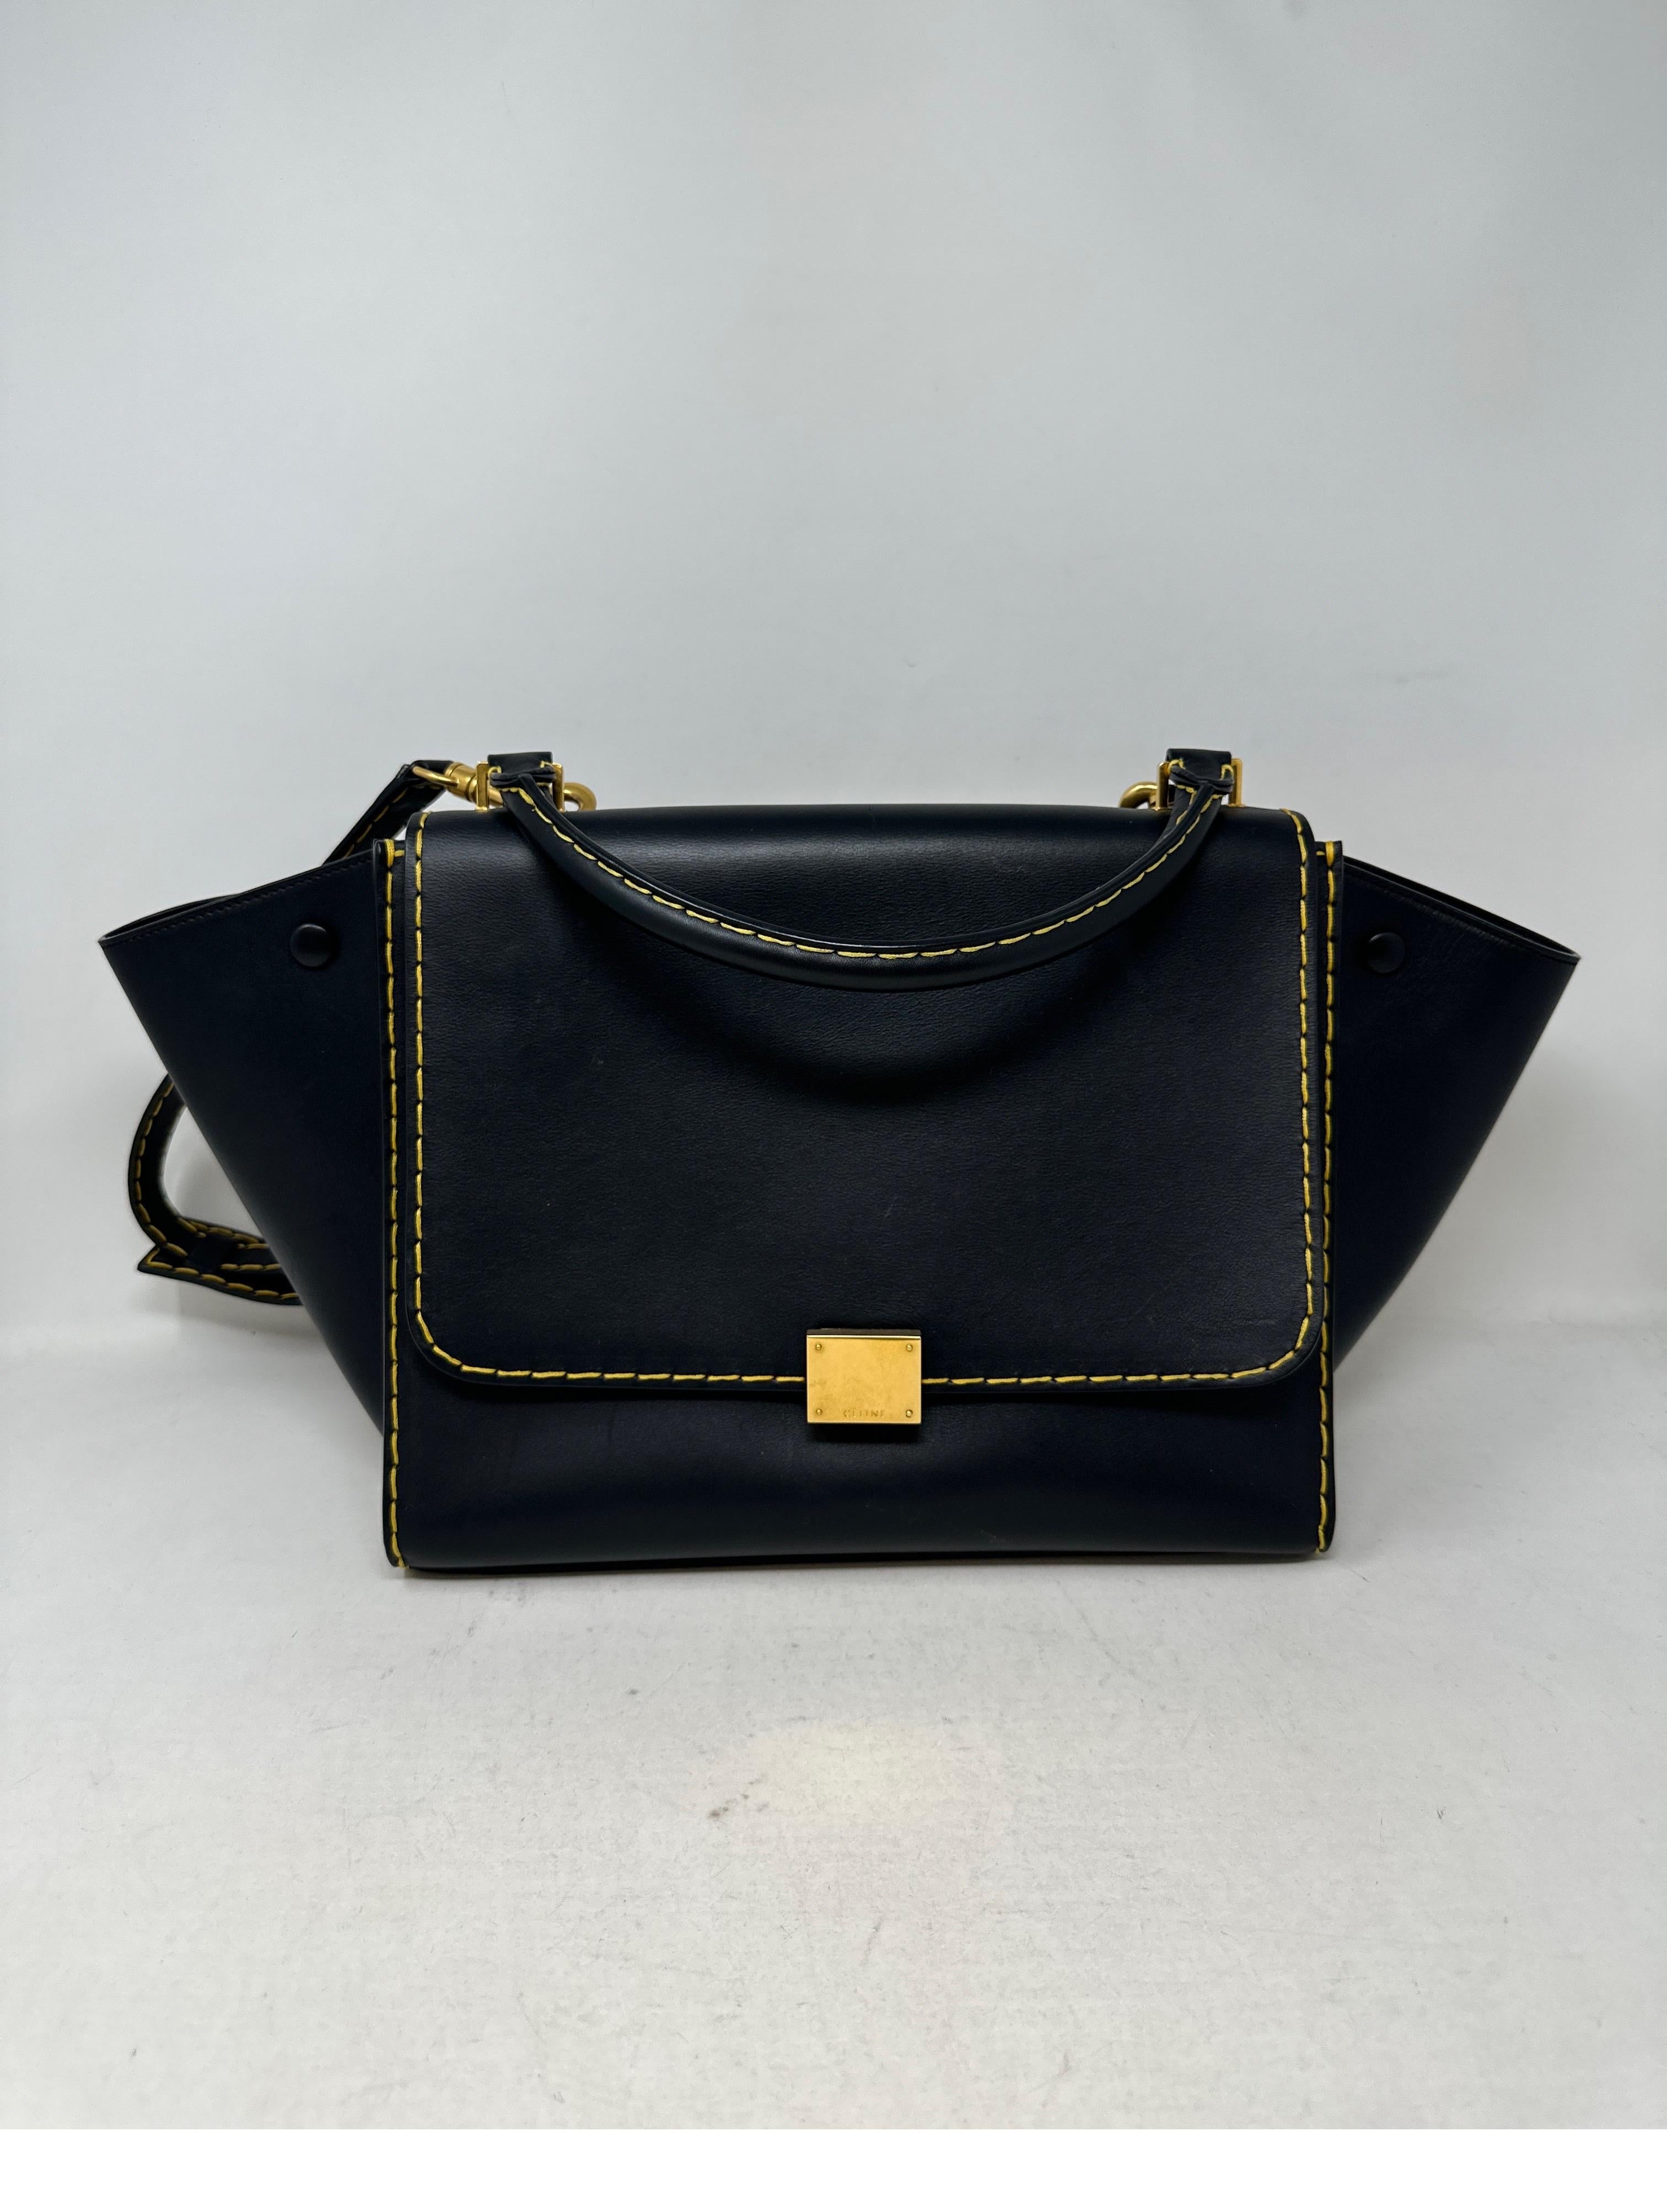 Celine Black Bag. Black leather with yellow contrast stitching. Excellent condition. Gold hardware. Interior clean. Unique style bag from Celine.